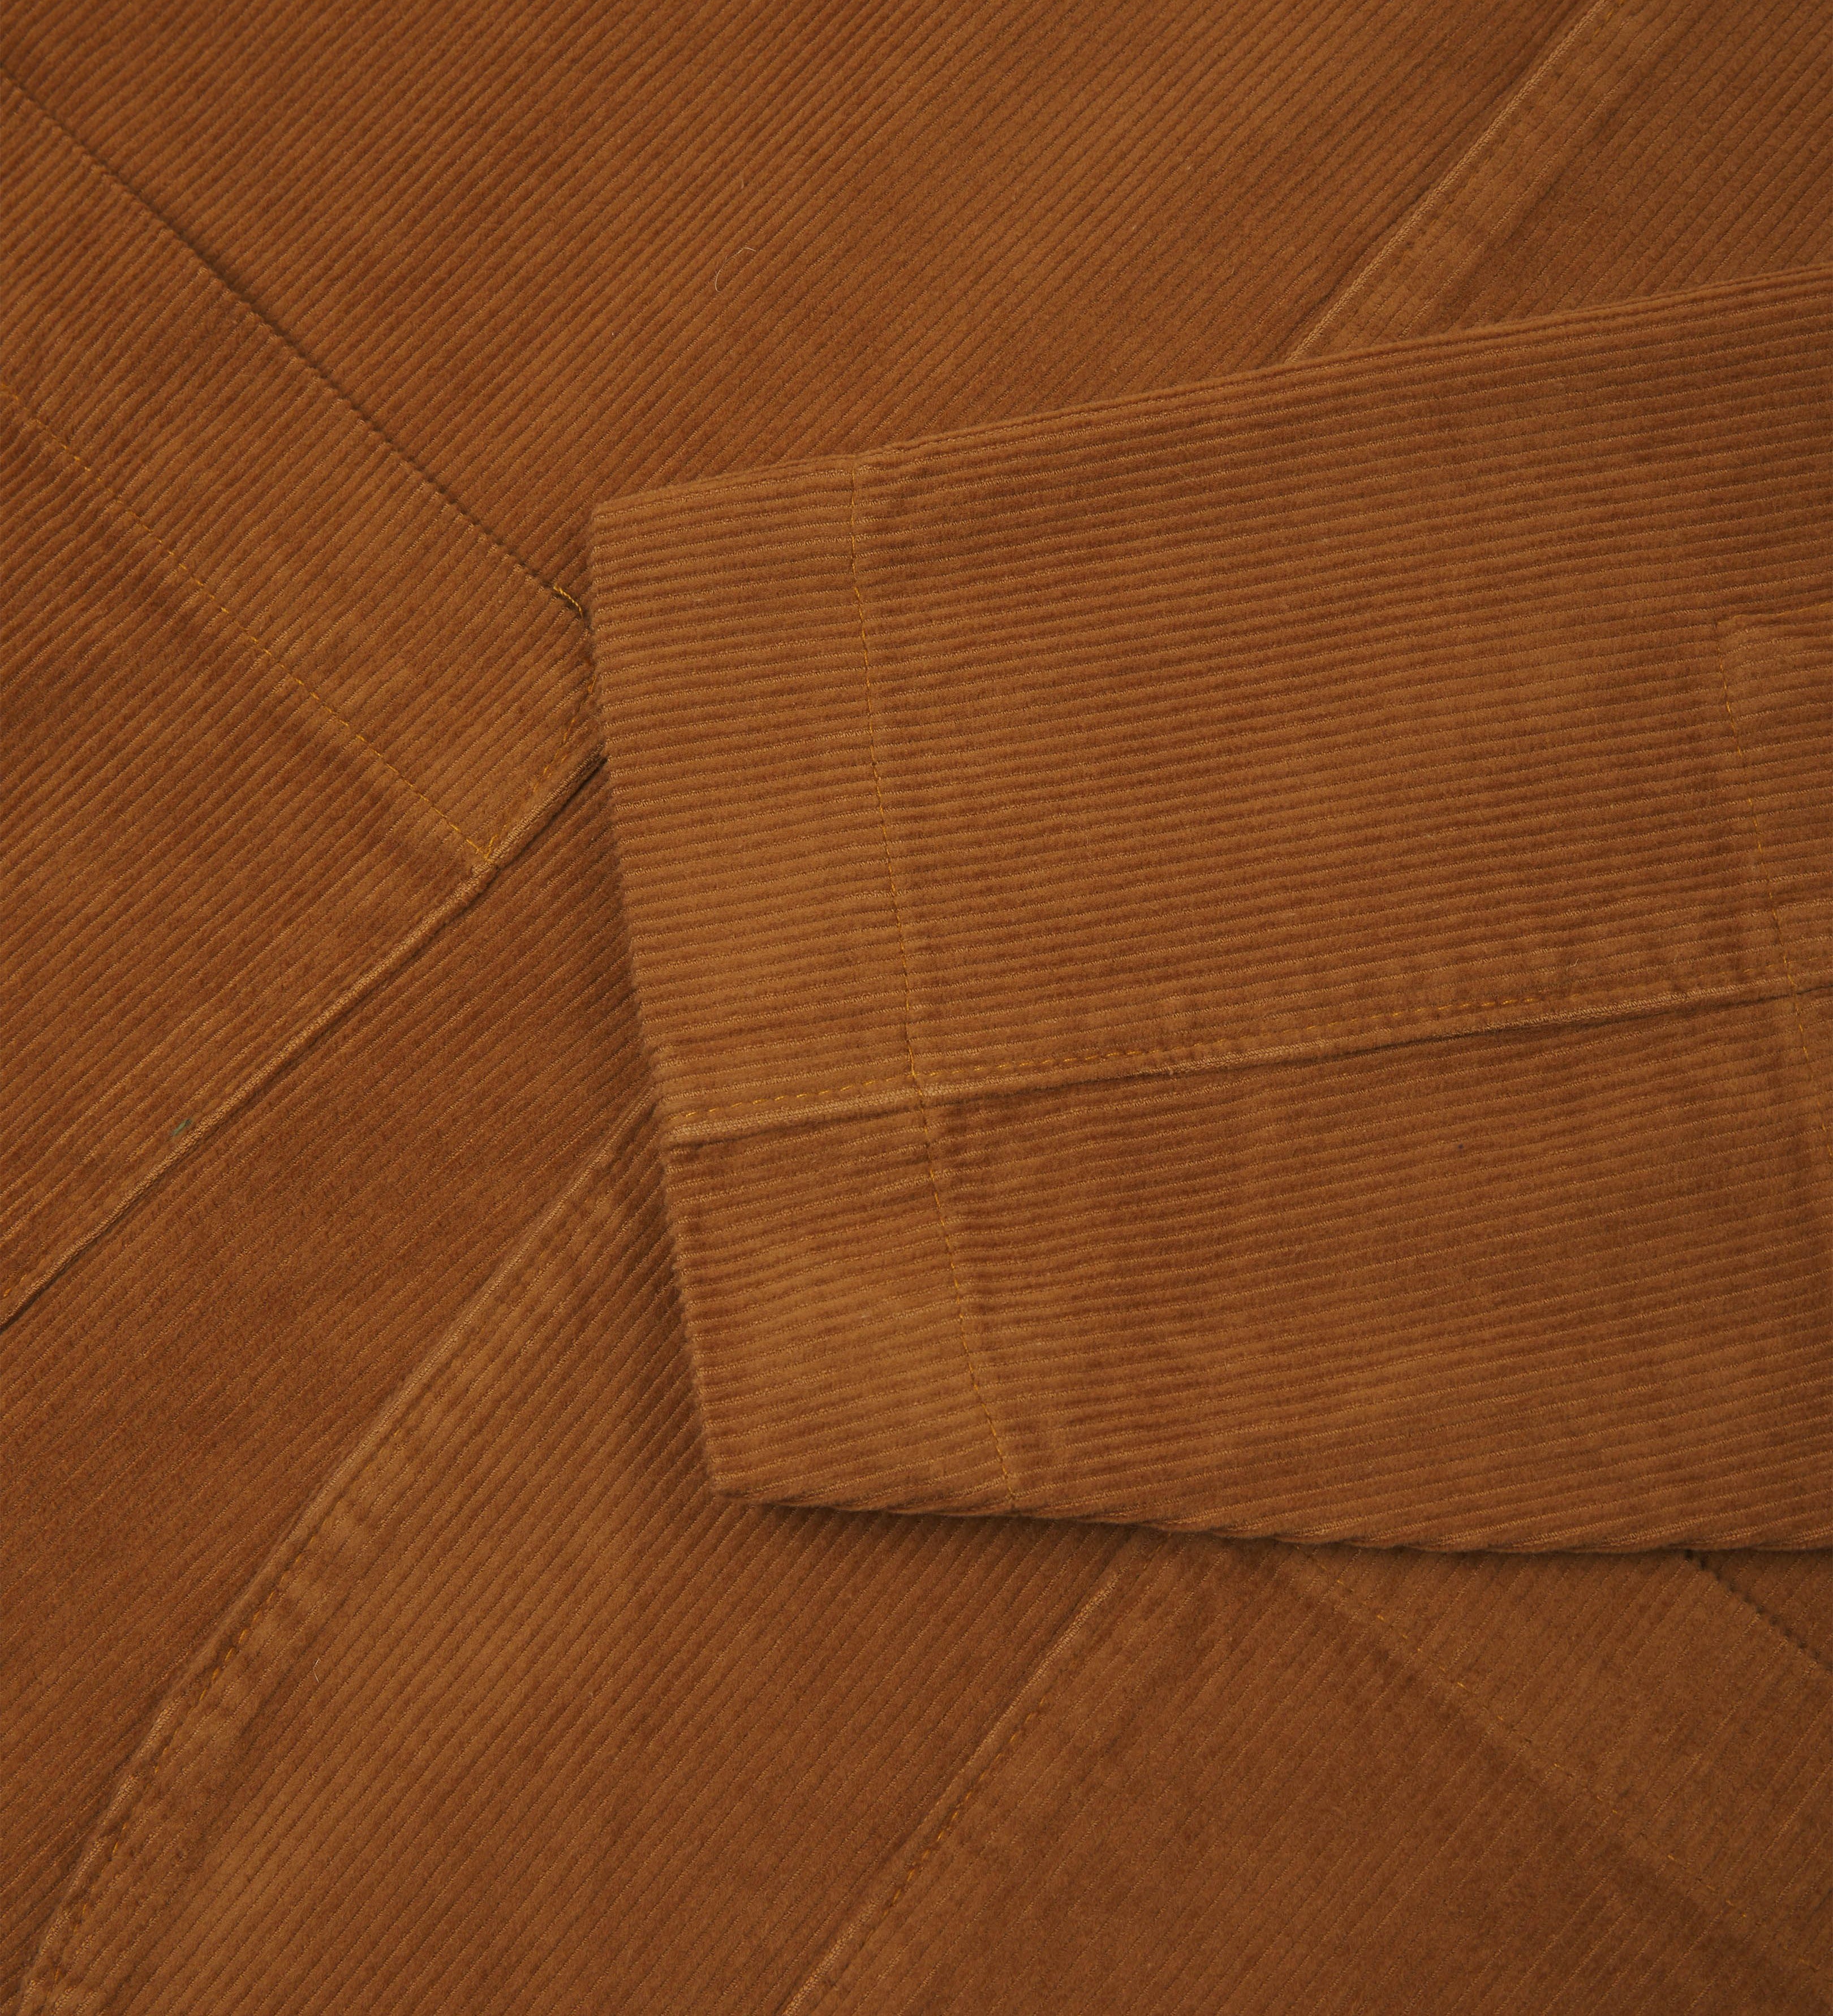 Close-up view of tan corduroy blazer from Uskees showing cuff detail.